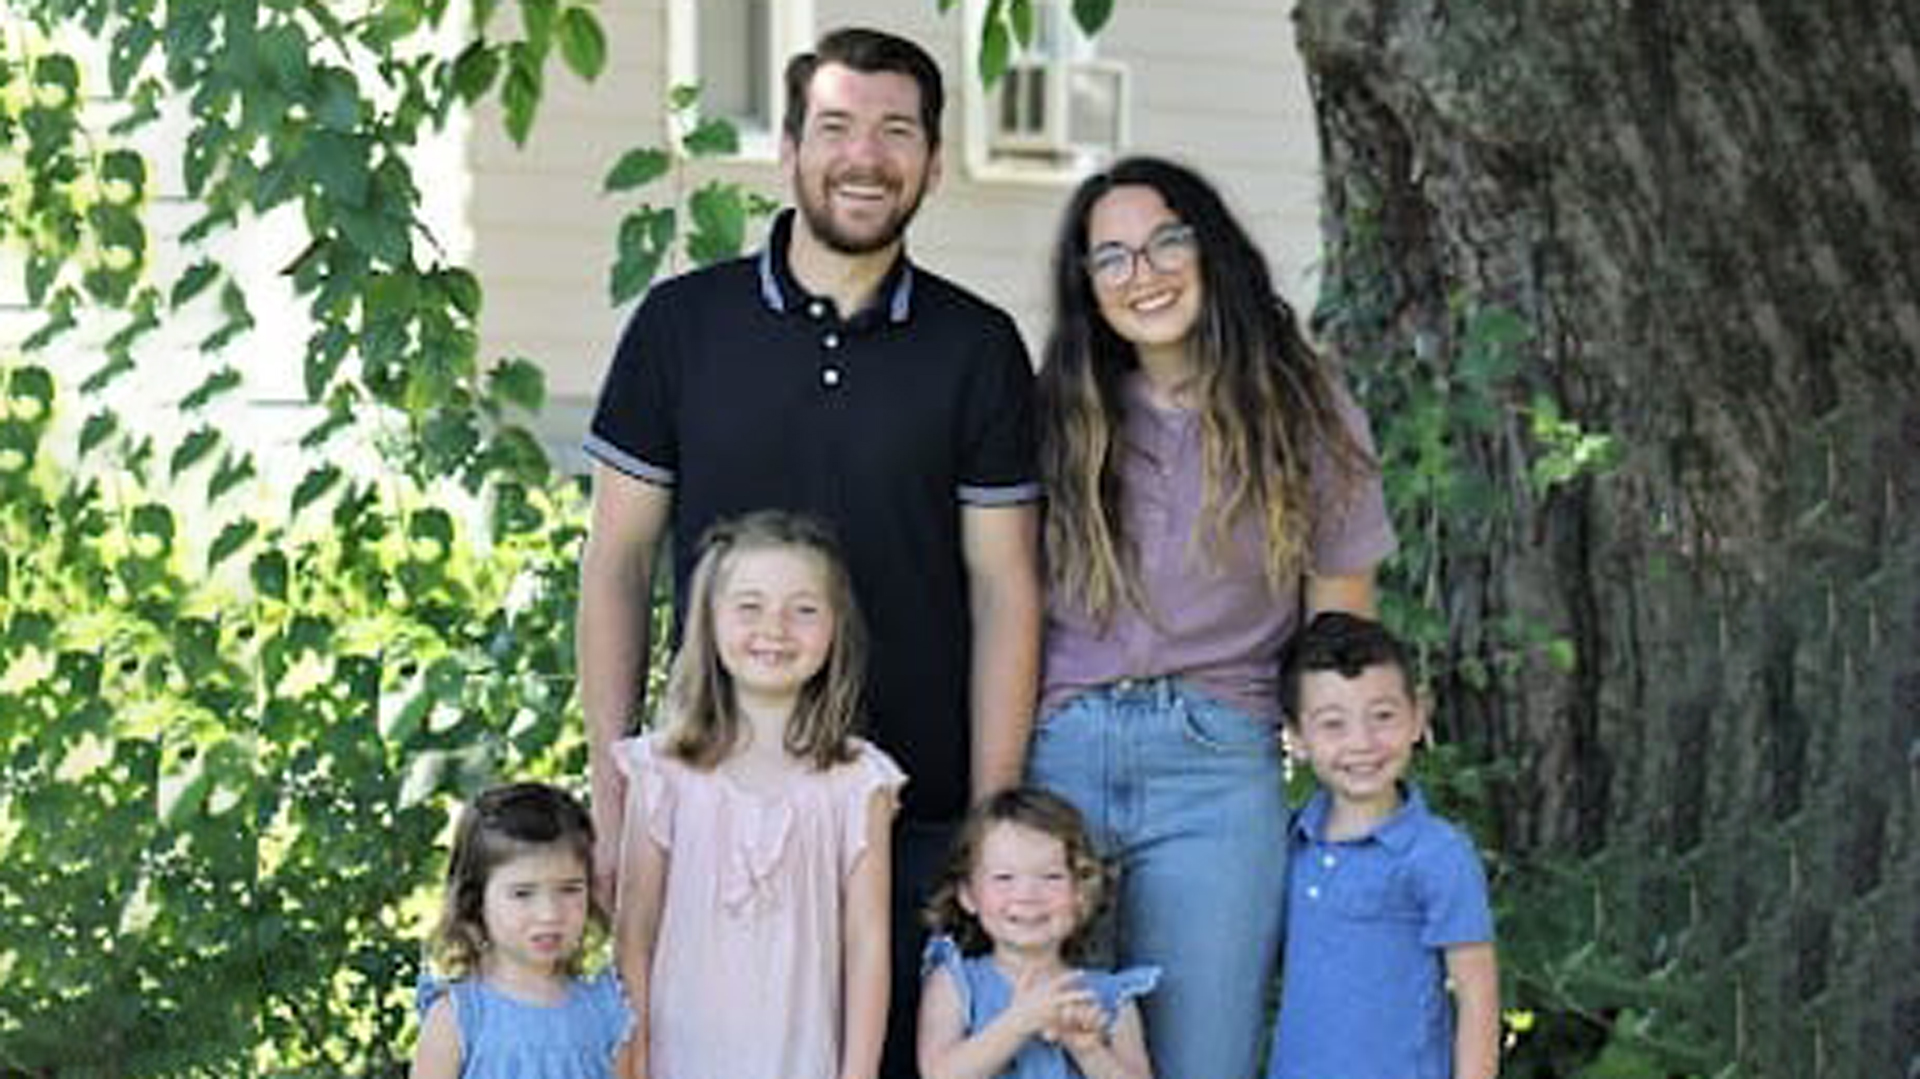 Joe and Kaylee Johnson and their 4 children